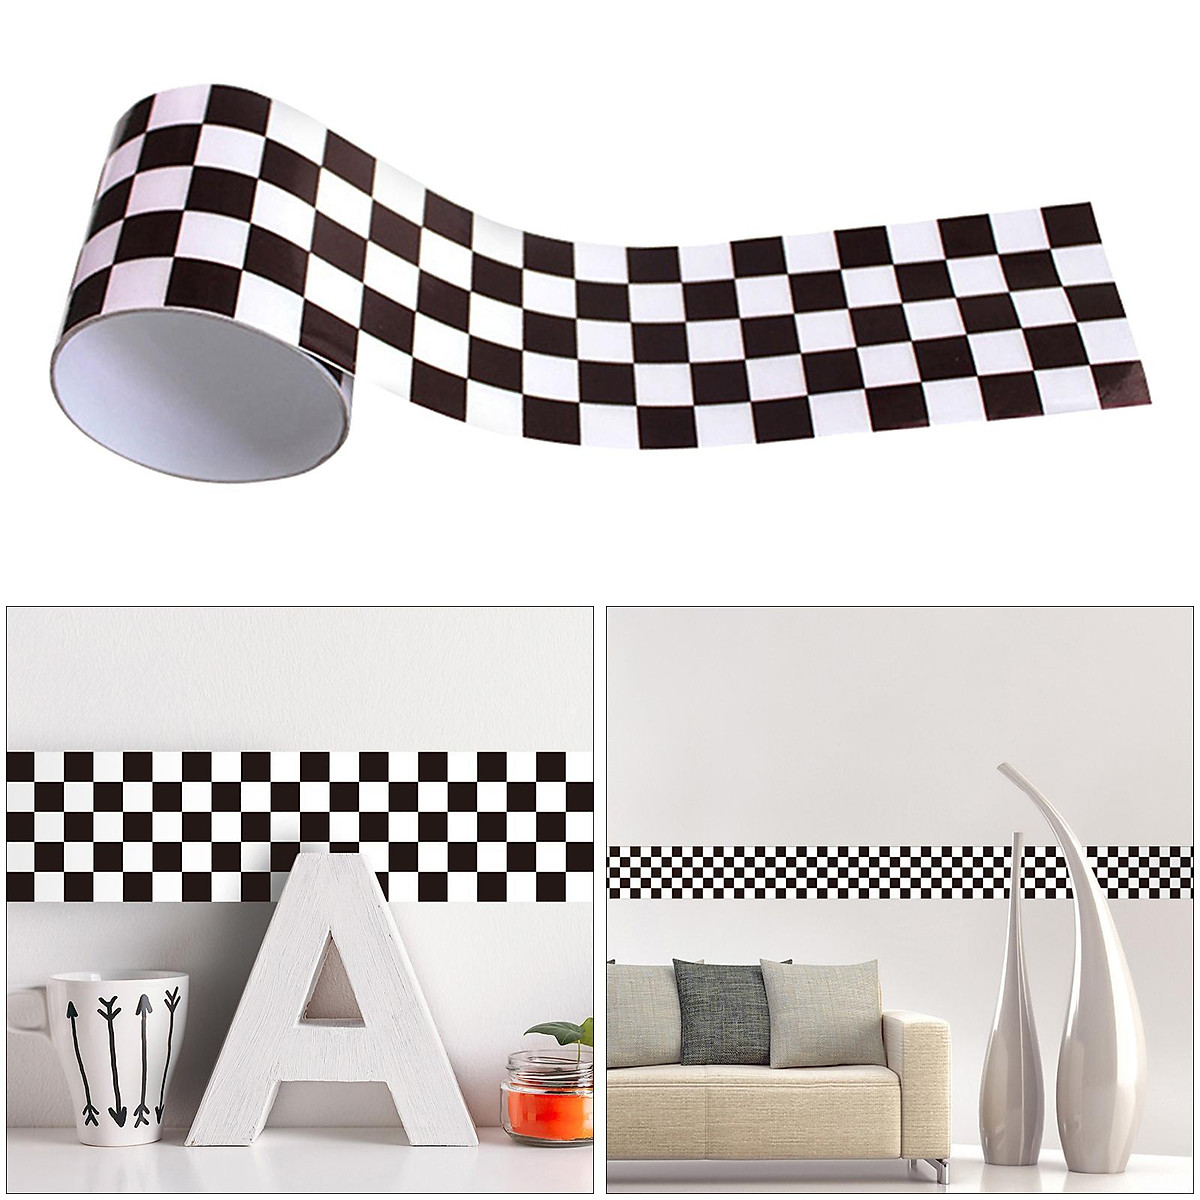 5xBlack White Grid Mosaic Wall Decal Wall Sticker Living Room